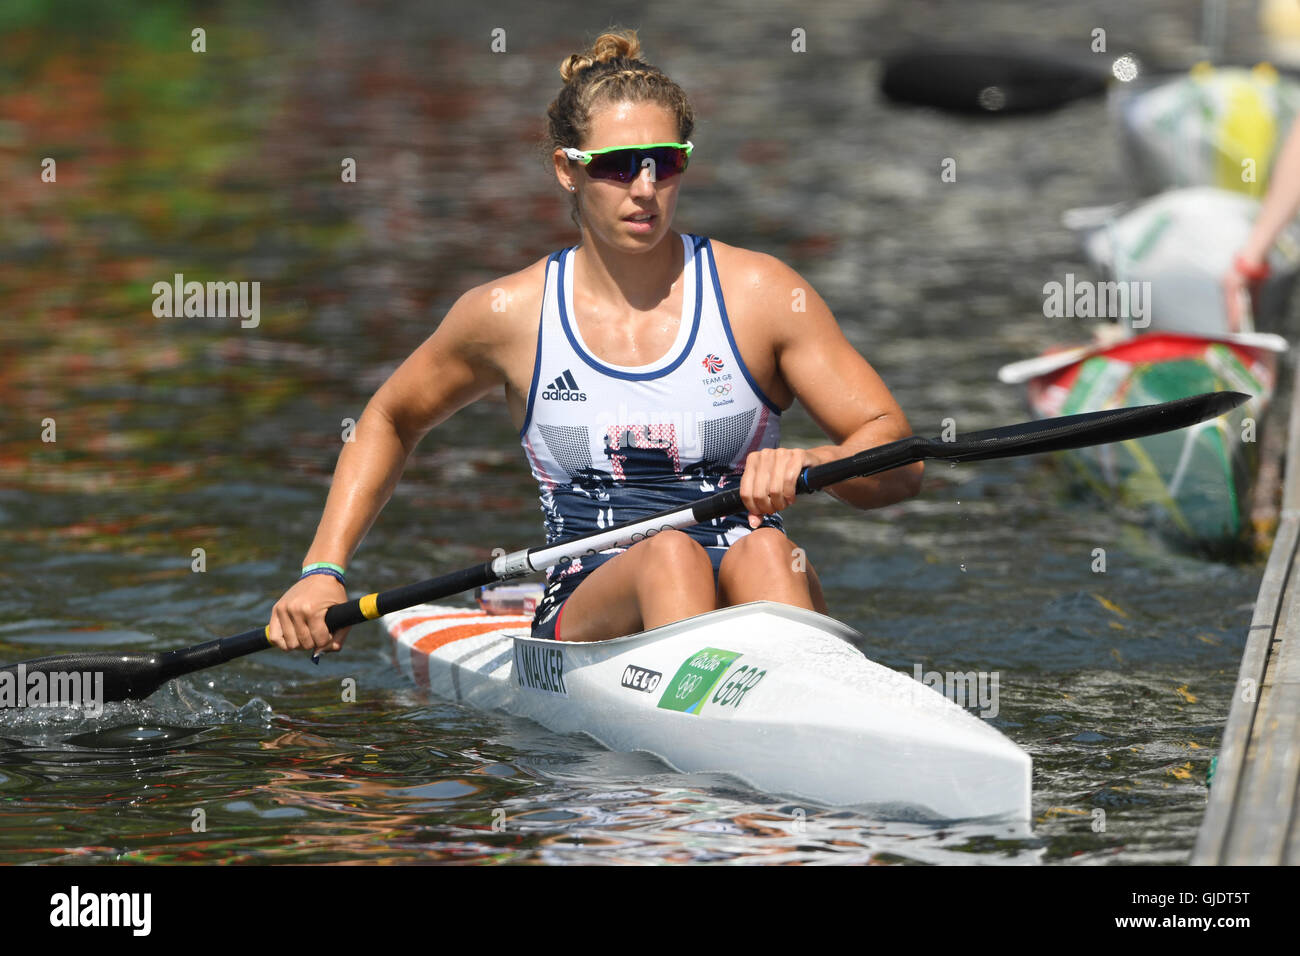 Rio de Janeiro, Brazil. 15th Aug, 2016. Jess Walker of Great Britain  paddles after the Women's Kayak Single 200m Semifinals of the Canoe Sprint  events during the Rio 2016 Olympic Games at